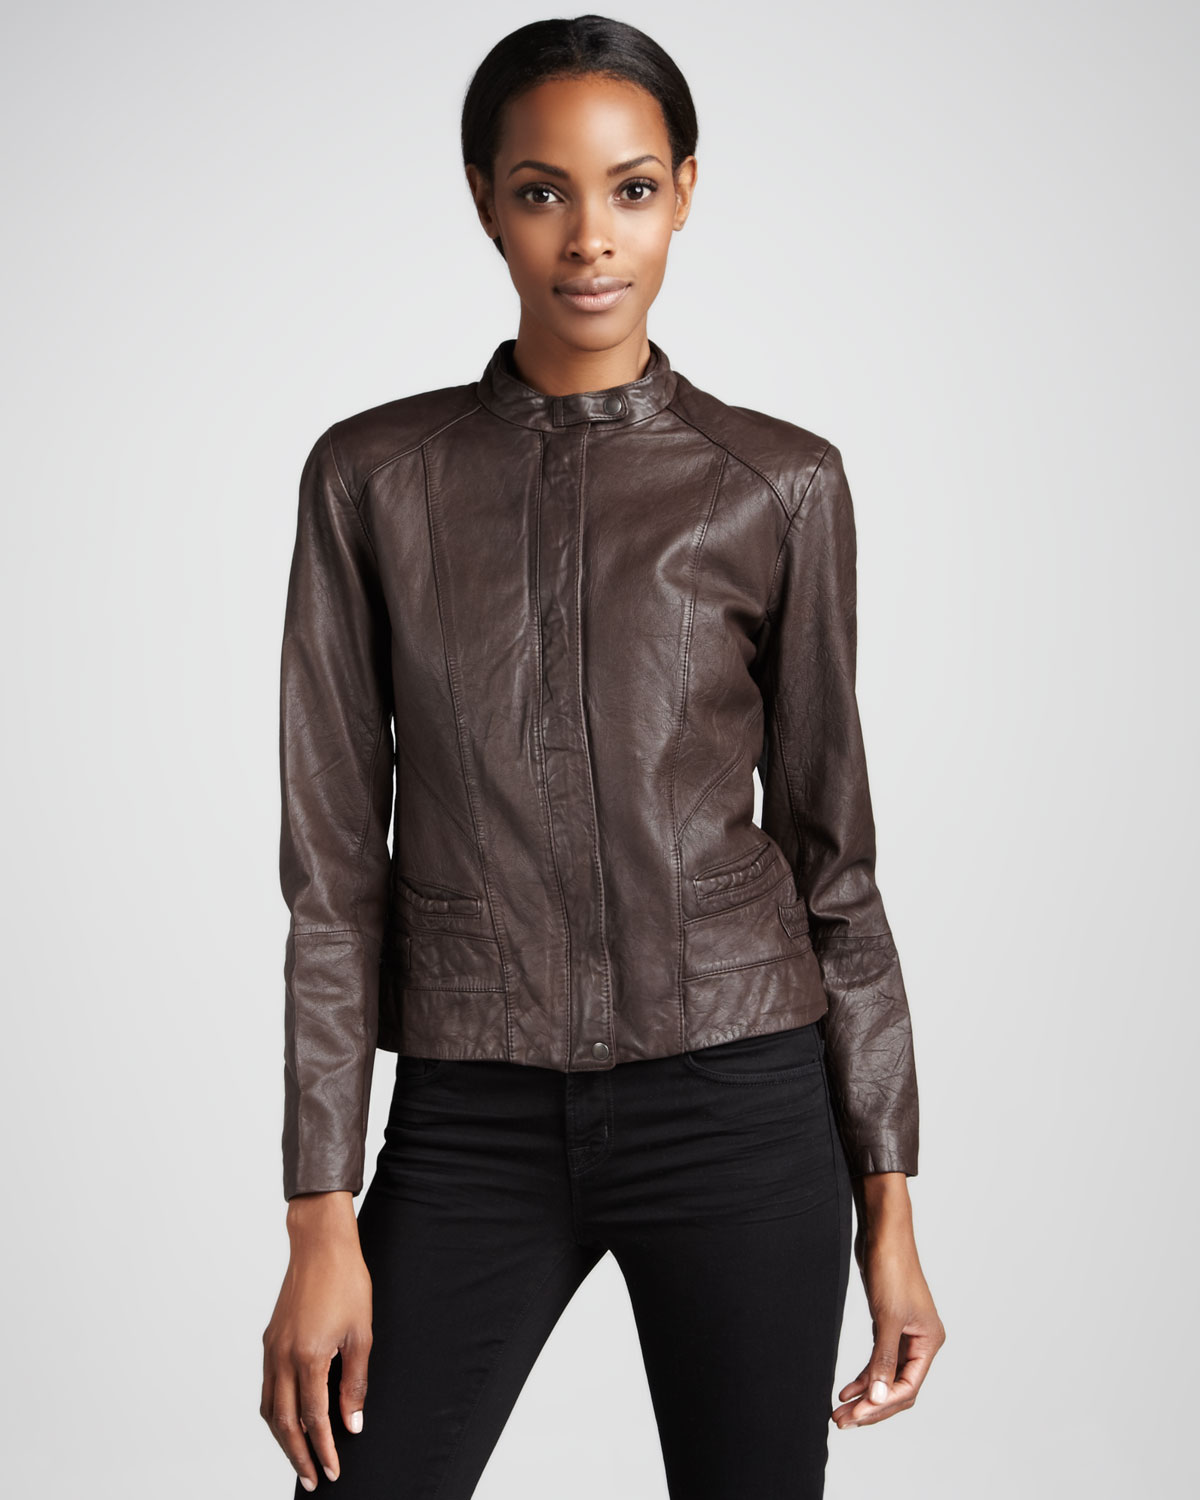 Cole haan Moto Leather Jacket in Brown Lyst